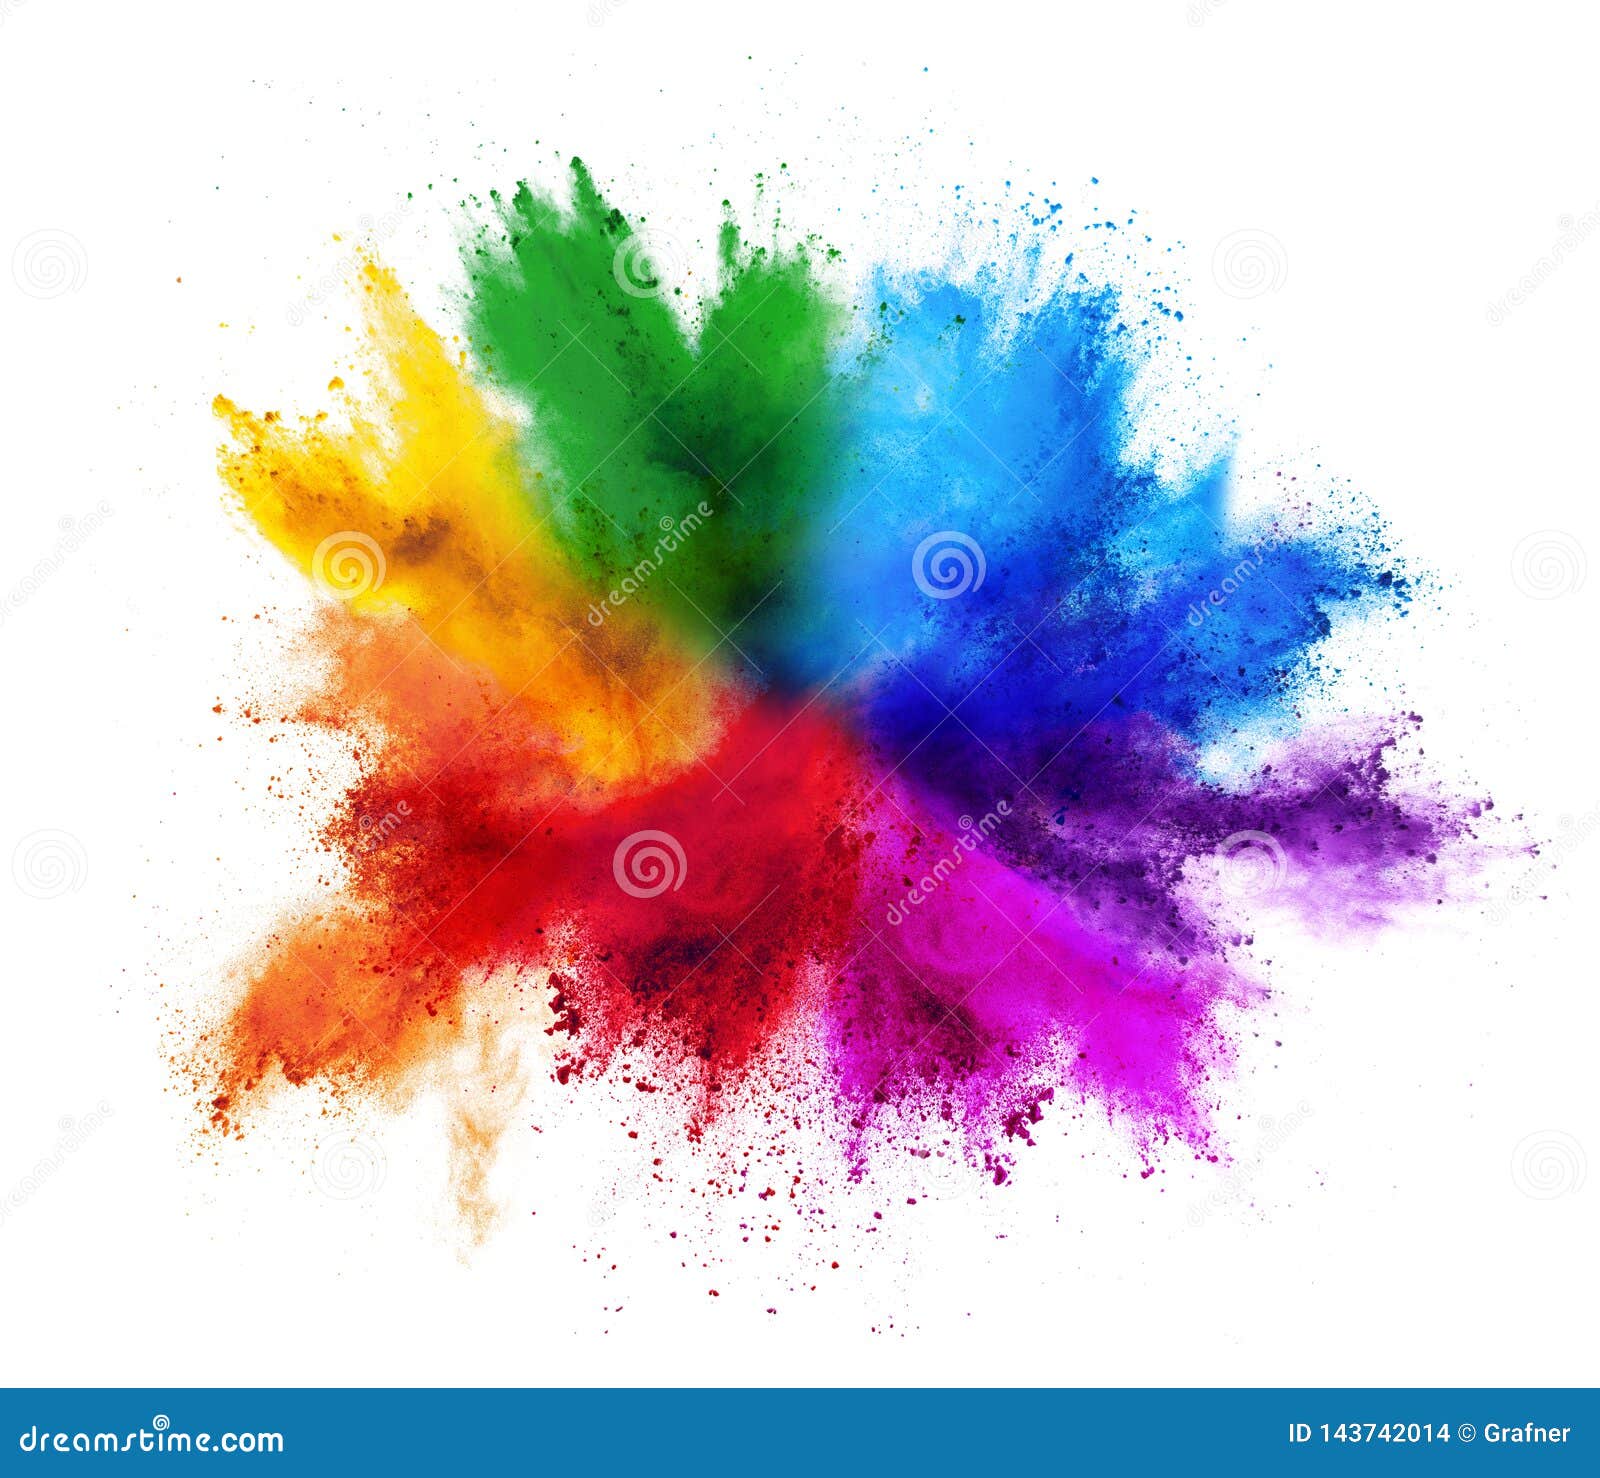 Holi Background Images HD Pictures and Wallpaper For Free Download   Pngtree